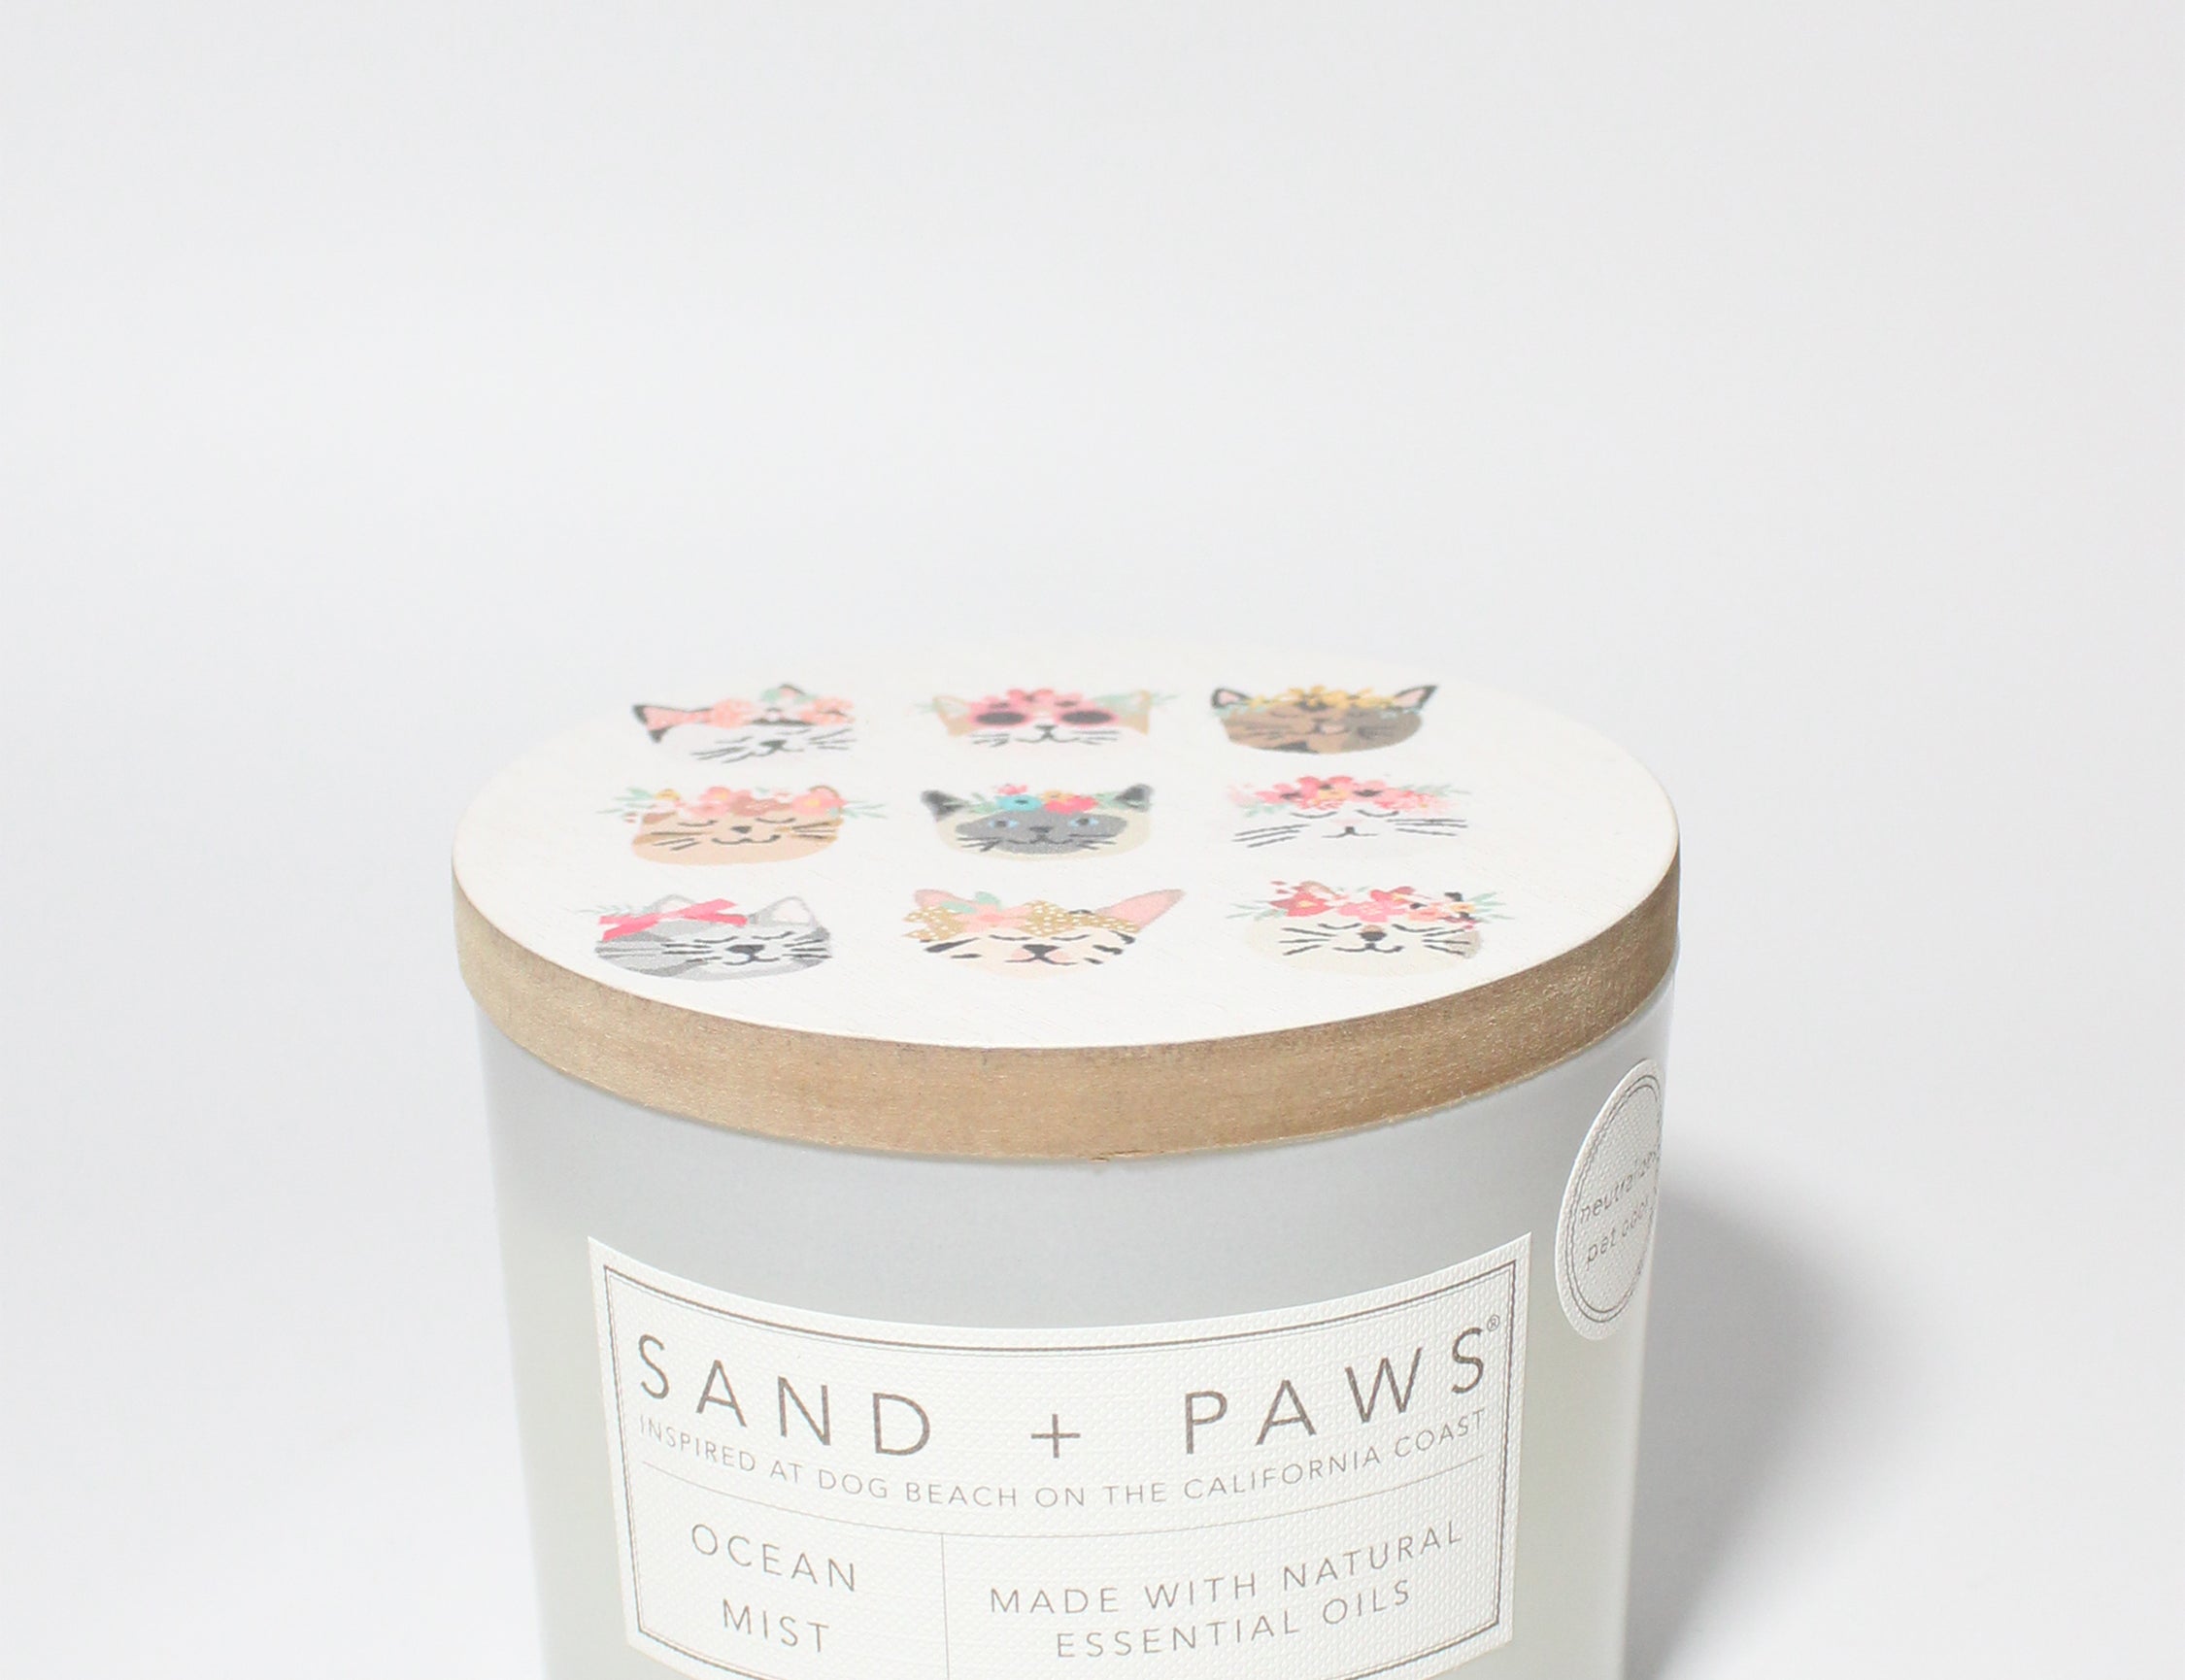 Sand + Paws Ocean Mist 12 oz scented candle White vessel with Painted Cat Grid lid